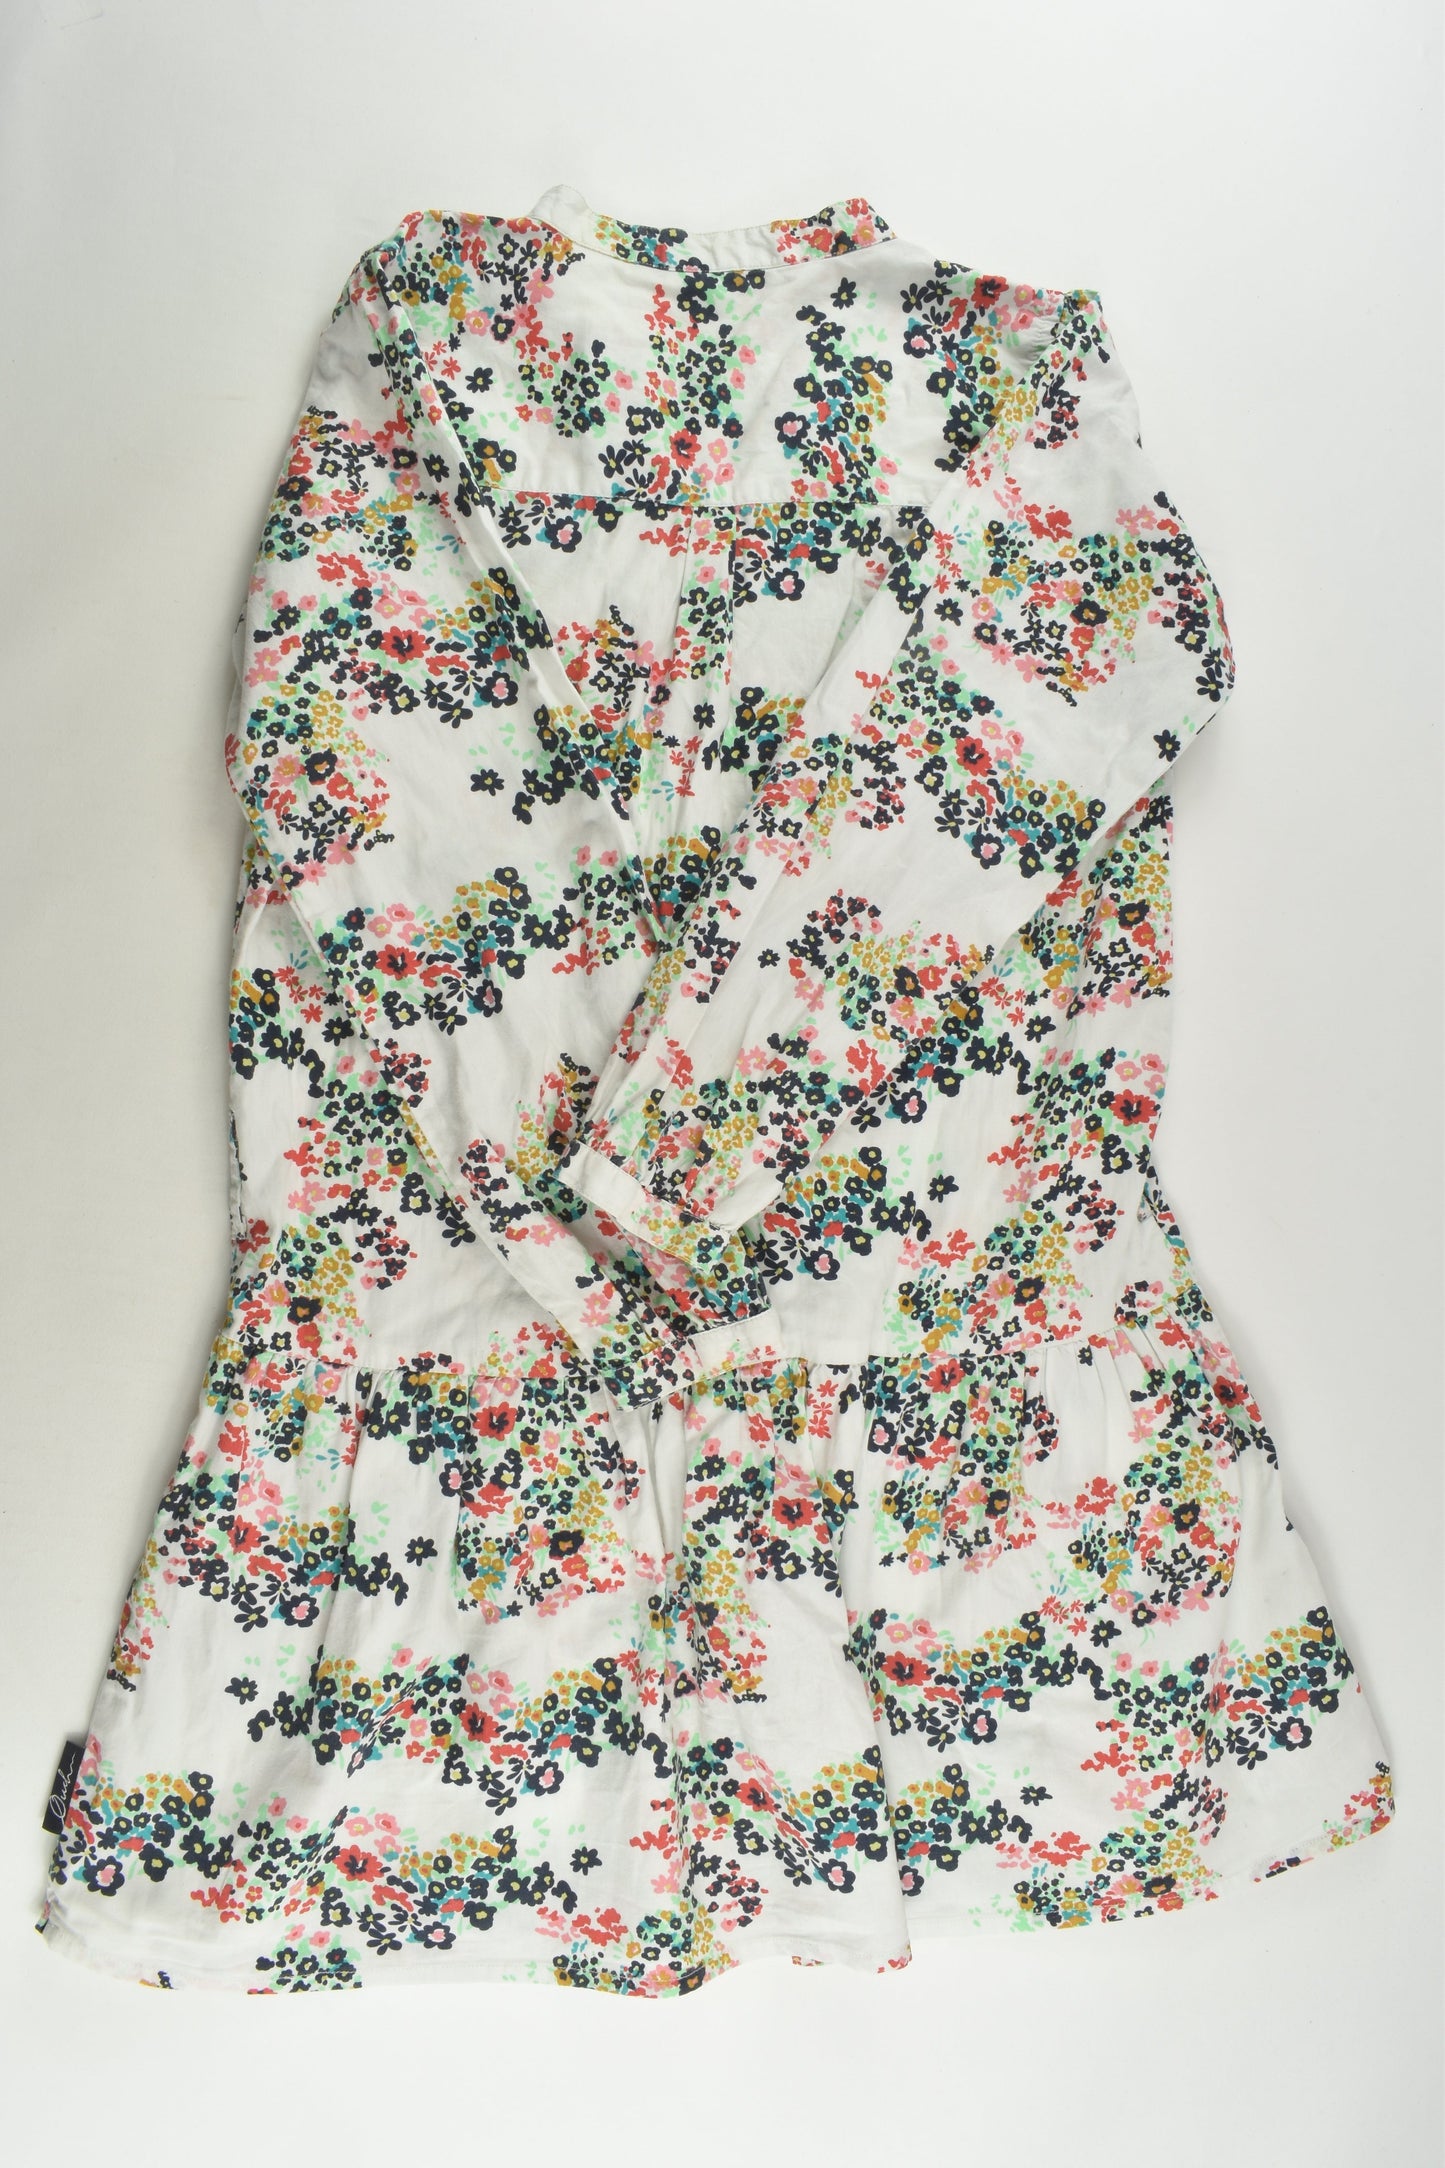 Ouch Size 12 Floral Dress